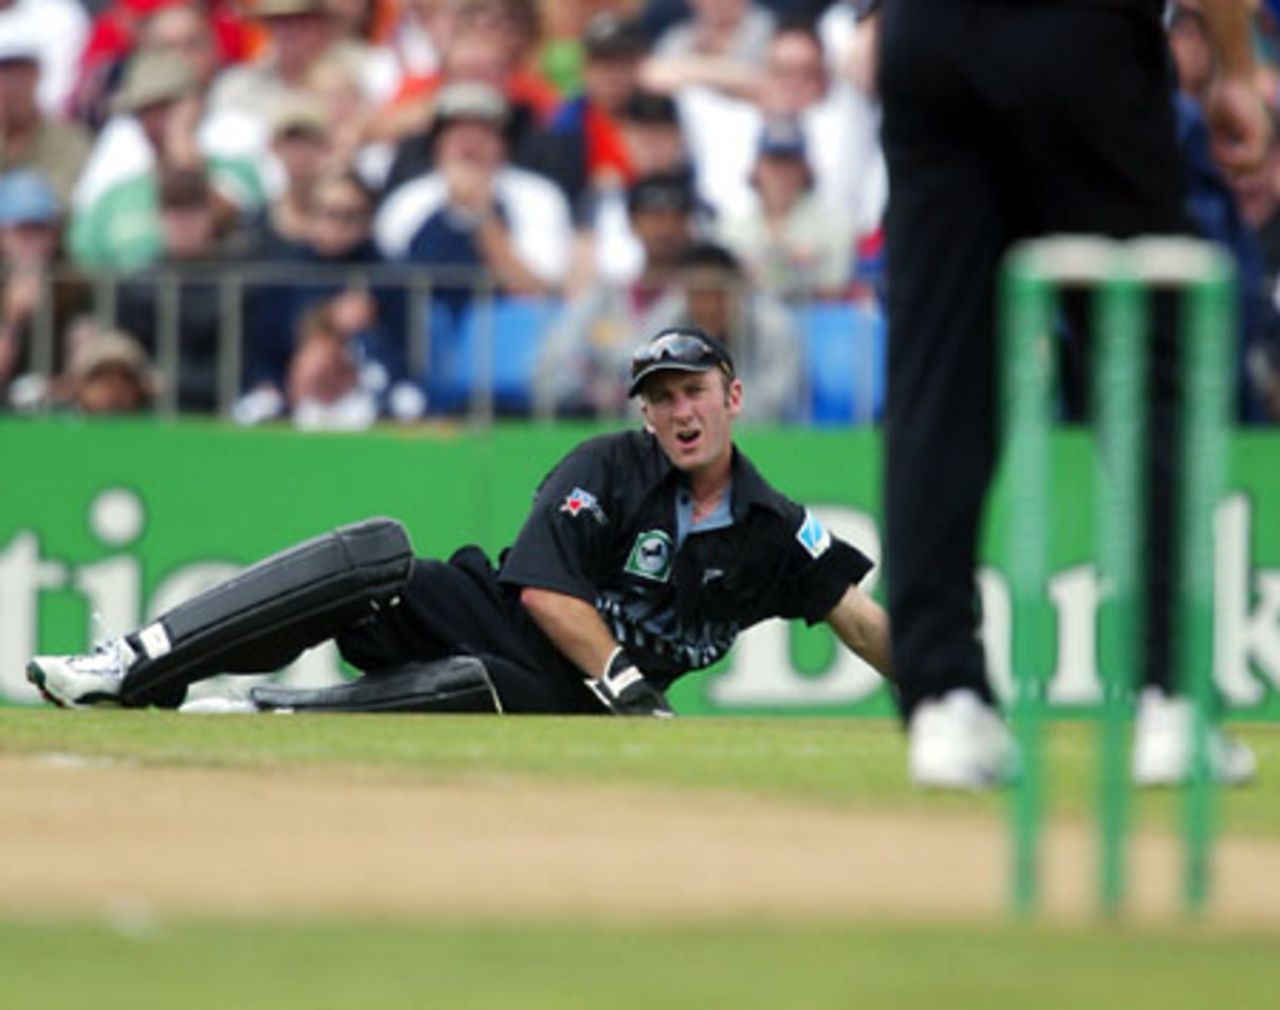 New Zealand wicket-keeper Chris Nevin drops a catch from England batsman Nick Knight off the bowling of Chris Cairns Cairns. Knight was on 28 at the time and went on to score 38. 4th ODI: New Zealand v England at Eden Park, Auckland, 23 February 2002.